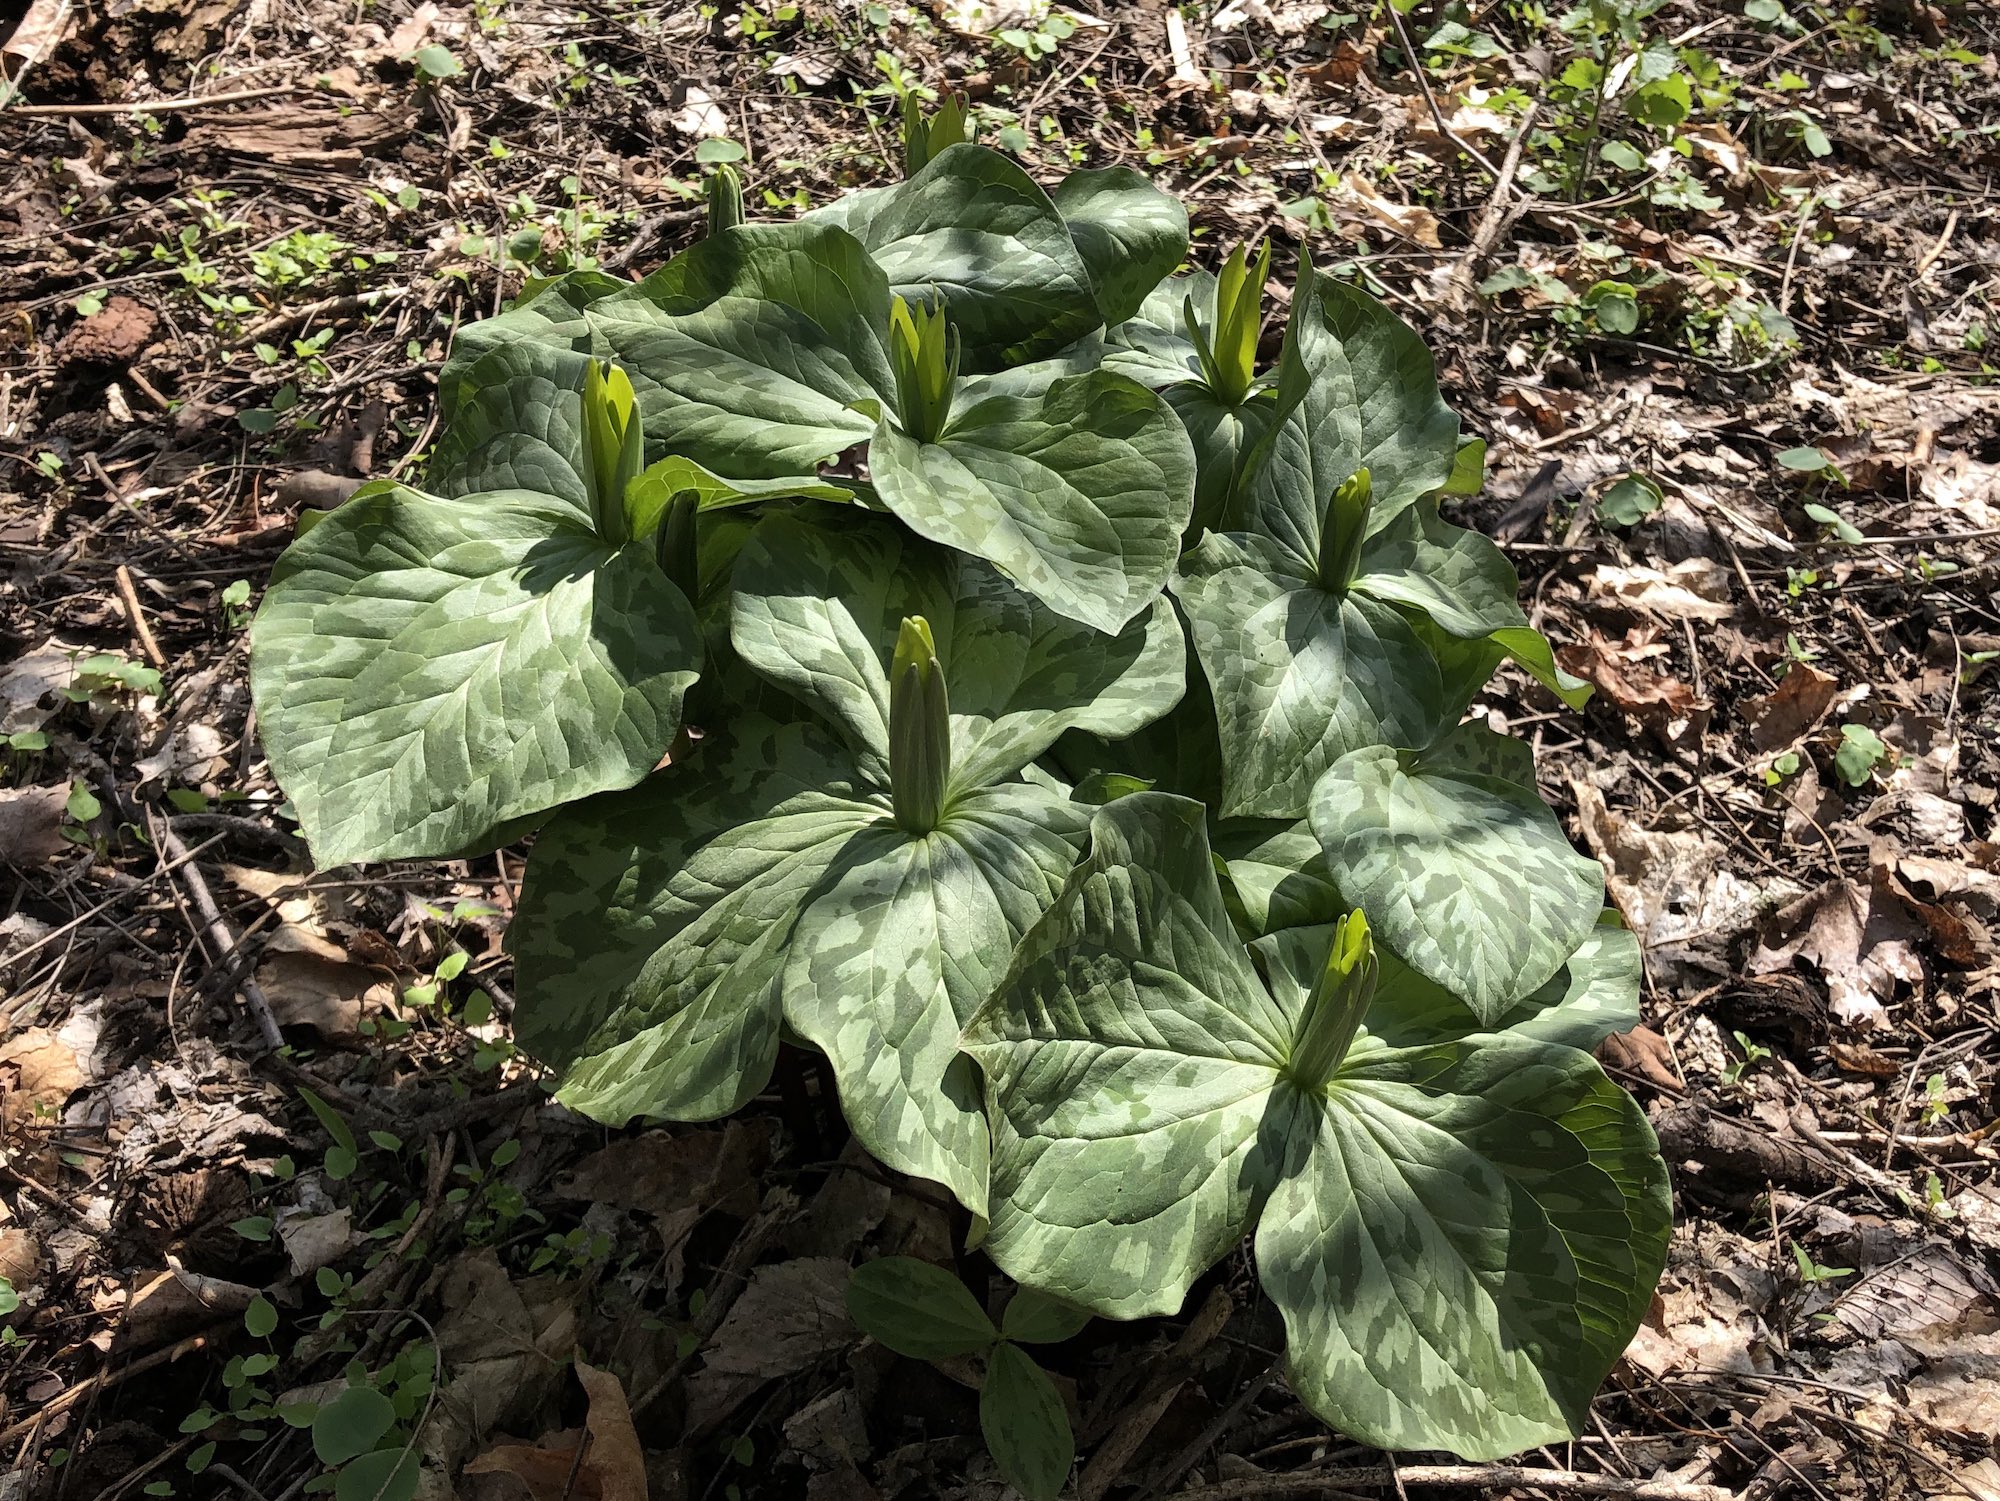 Yellow Trillium off of bike path between Marion Dunn and Duck Pond on April 24, 2019.